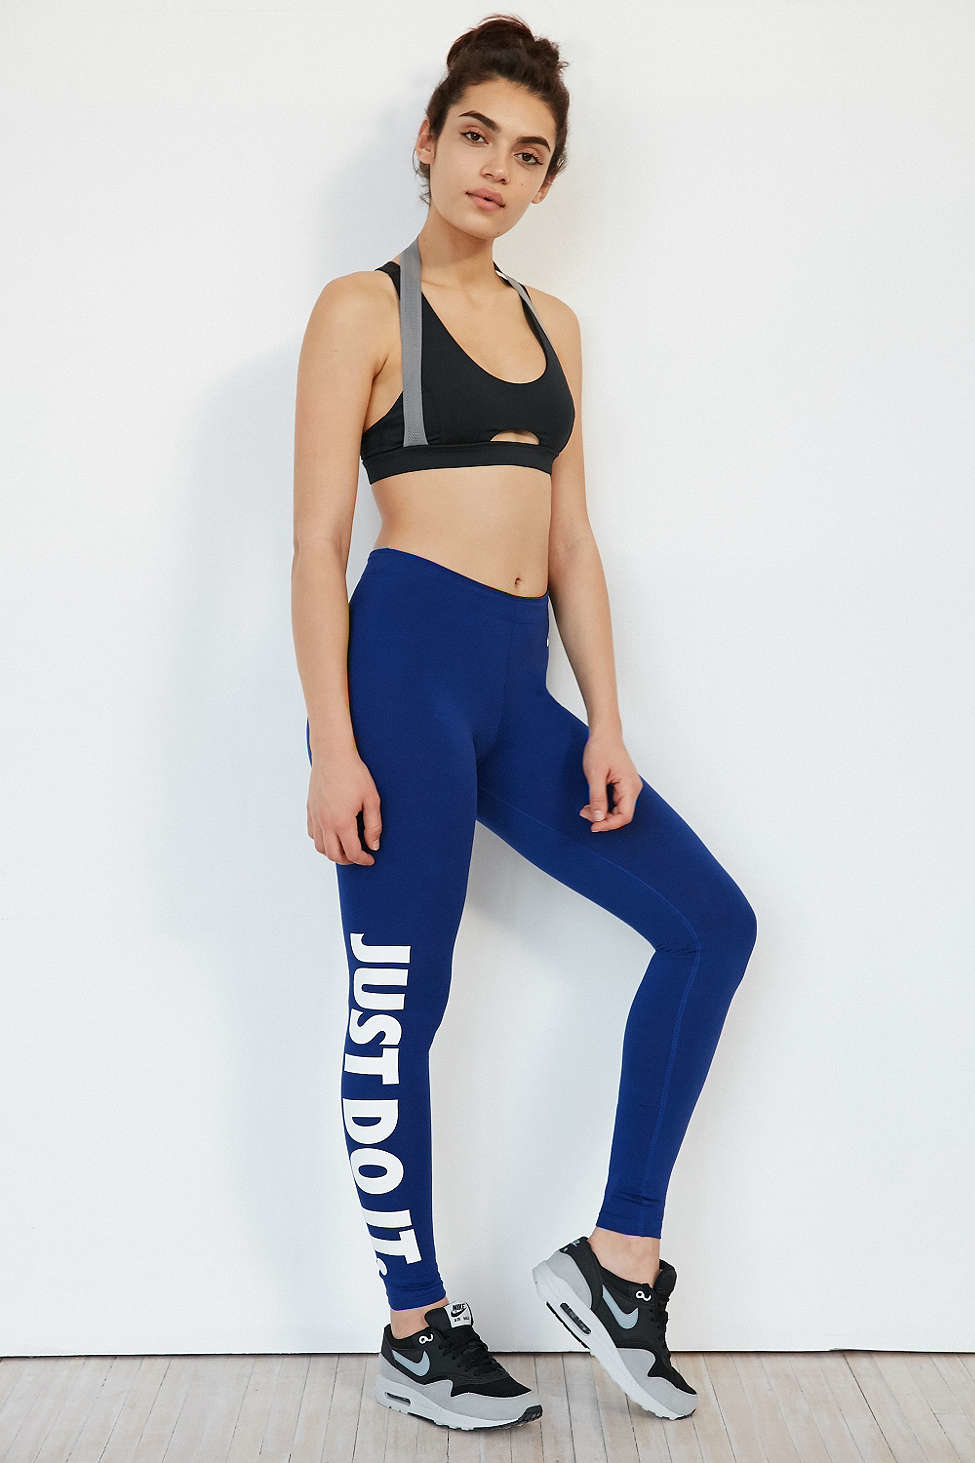 Nike Leg-a-see Just Do It Legging in Blue | Lyst